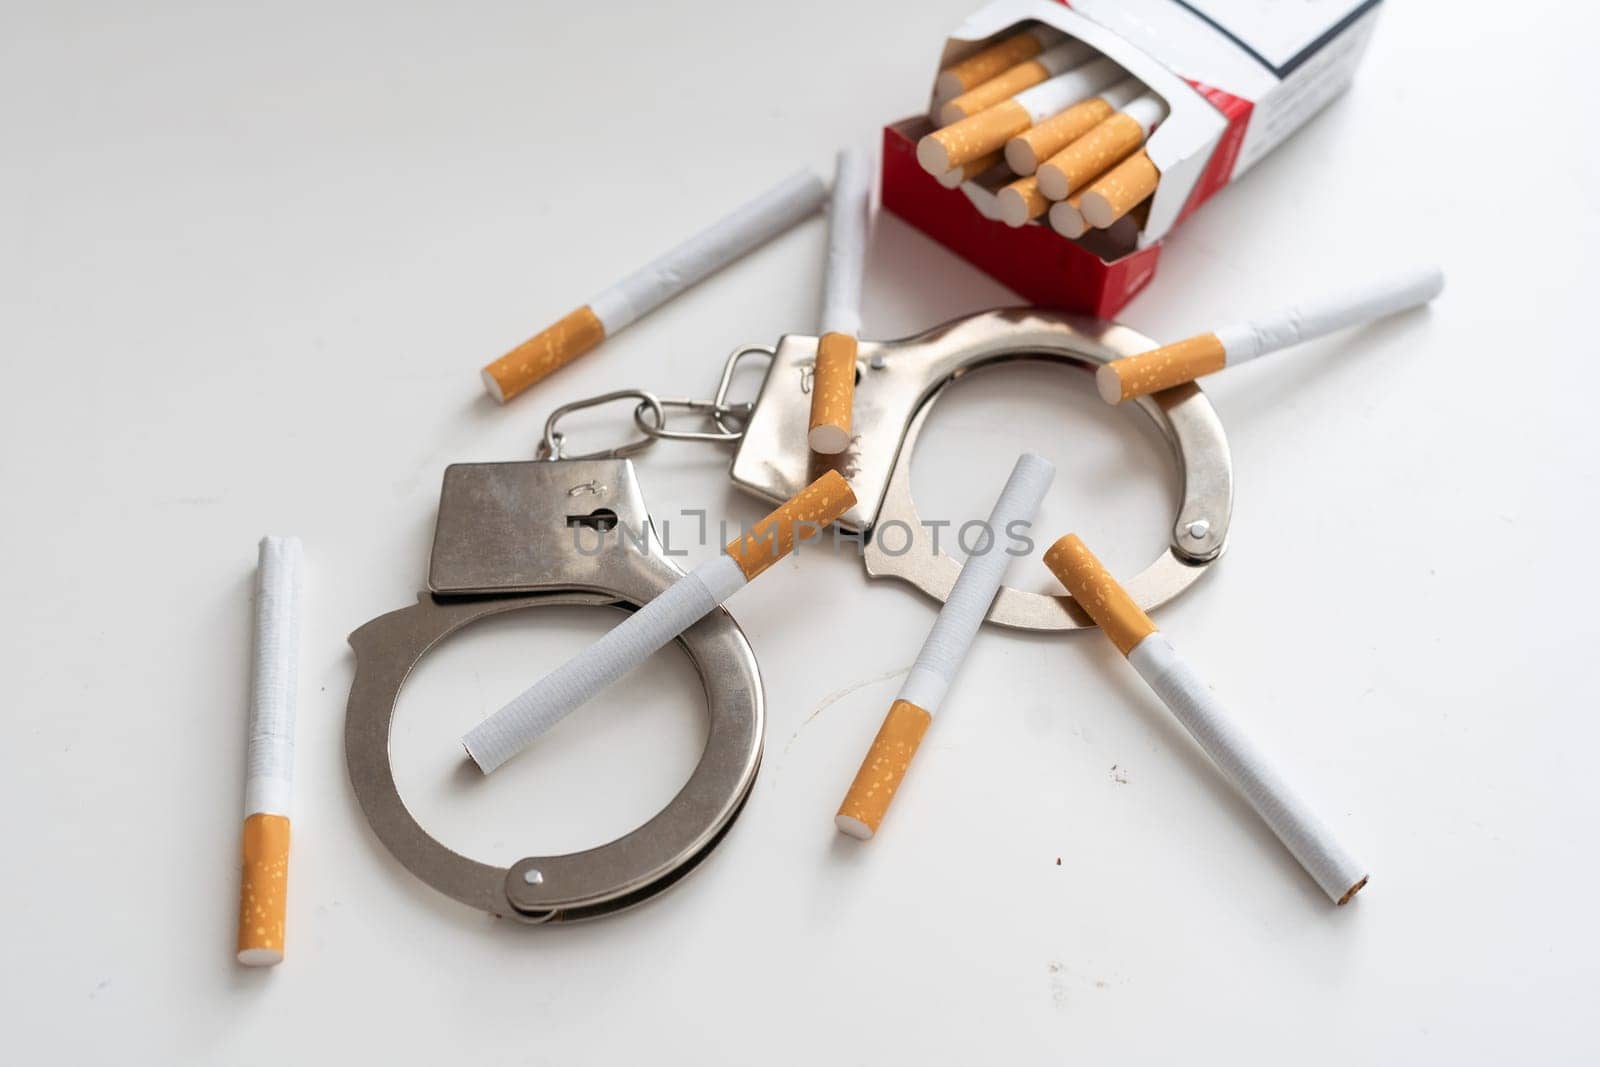 Cigarette tobacco nicotine habit - Stop smoking, isolated on white background. High quality photo